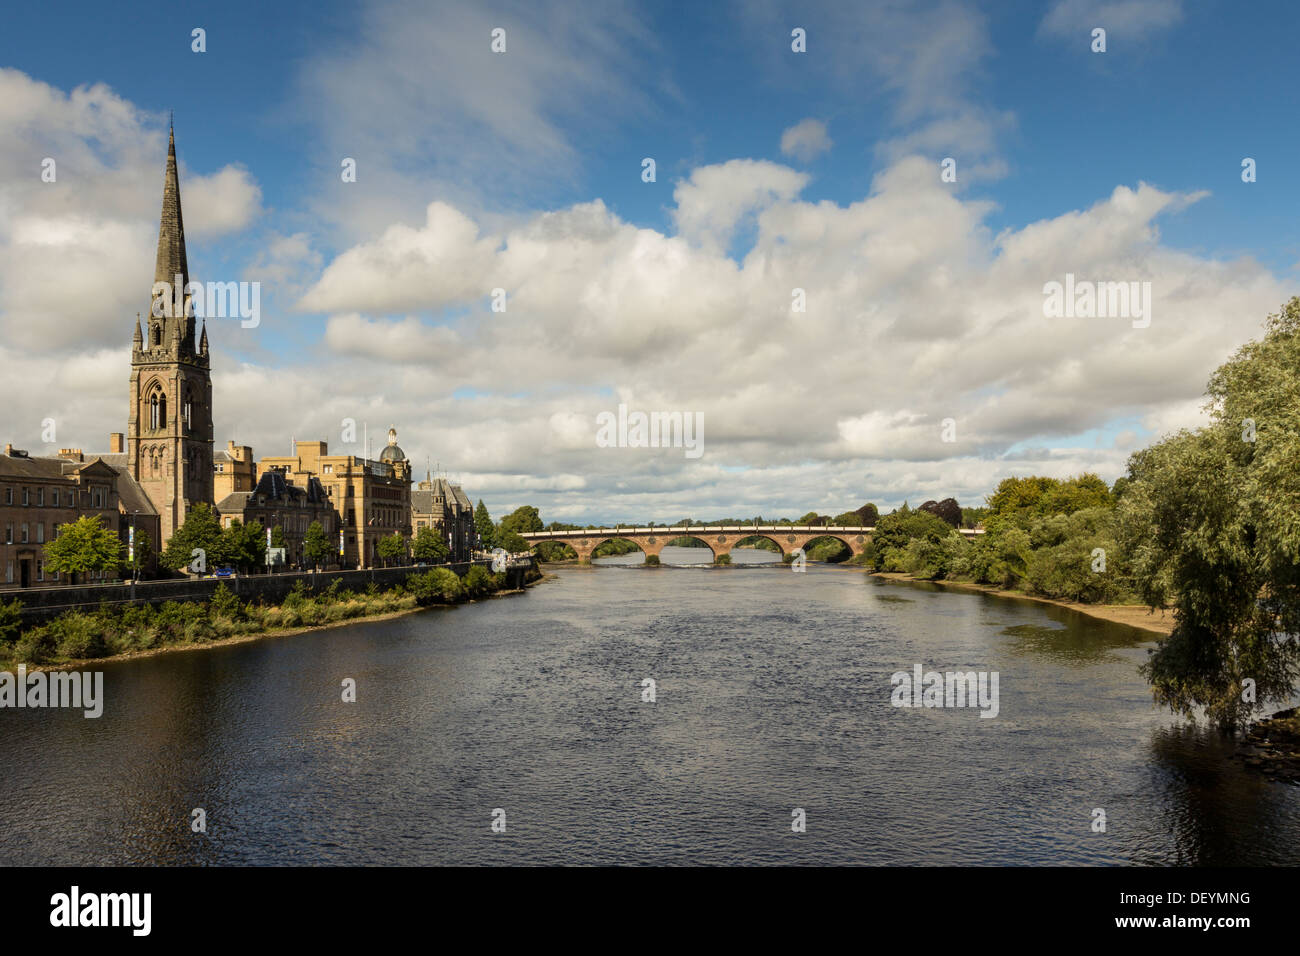 PERTH CITY SCOTLAND ON THE RIVER TAY WITH SMEATON'S OLD BRIDGE IN THE DISTANCE Stock Photo